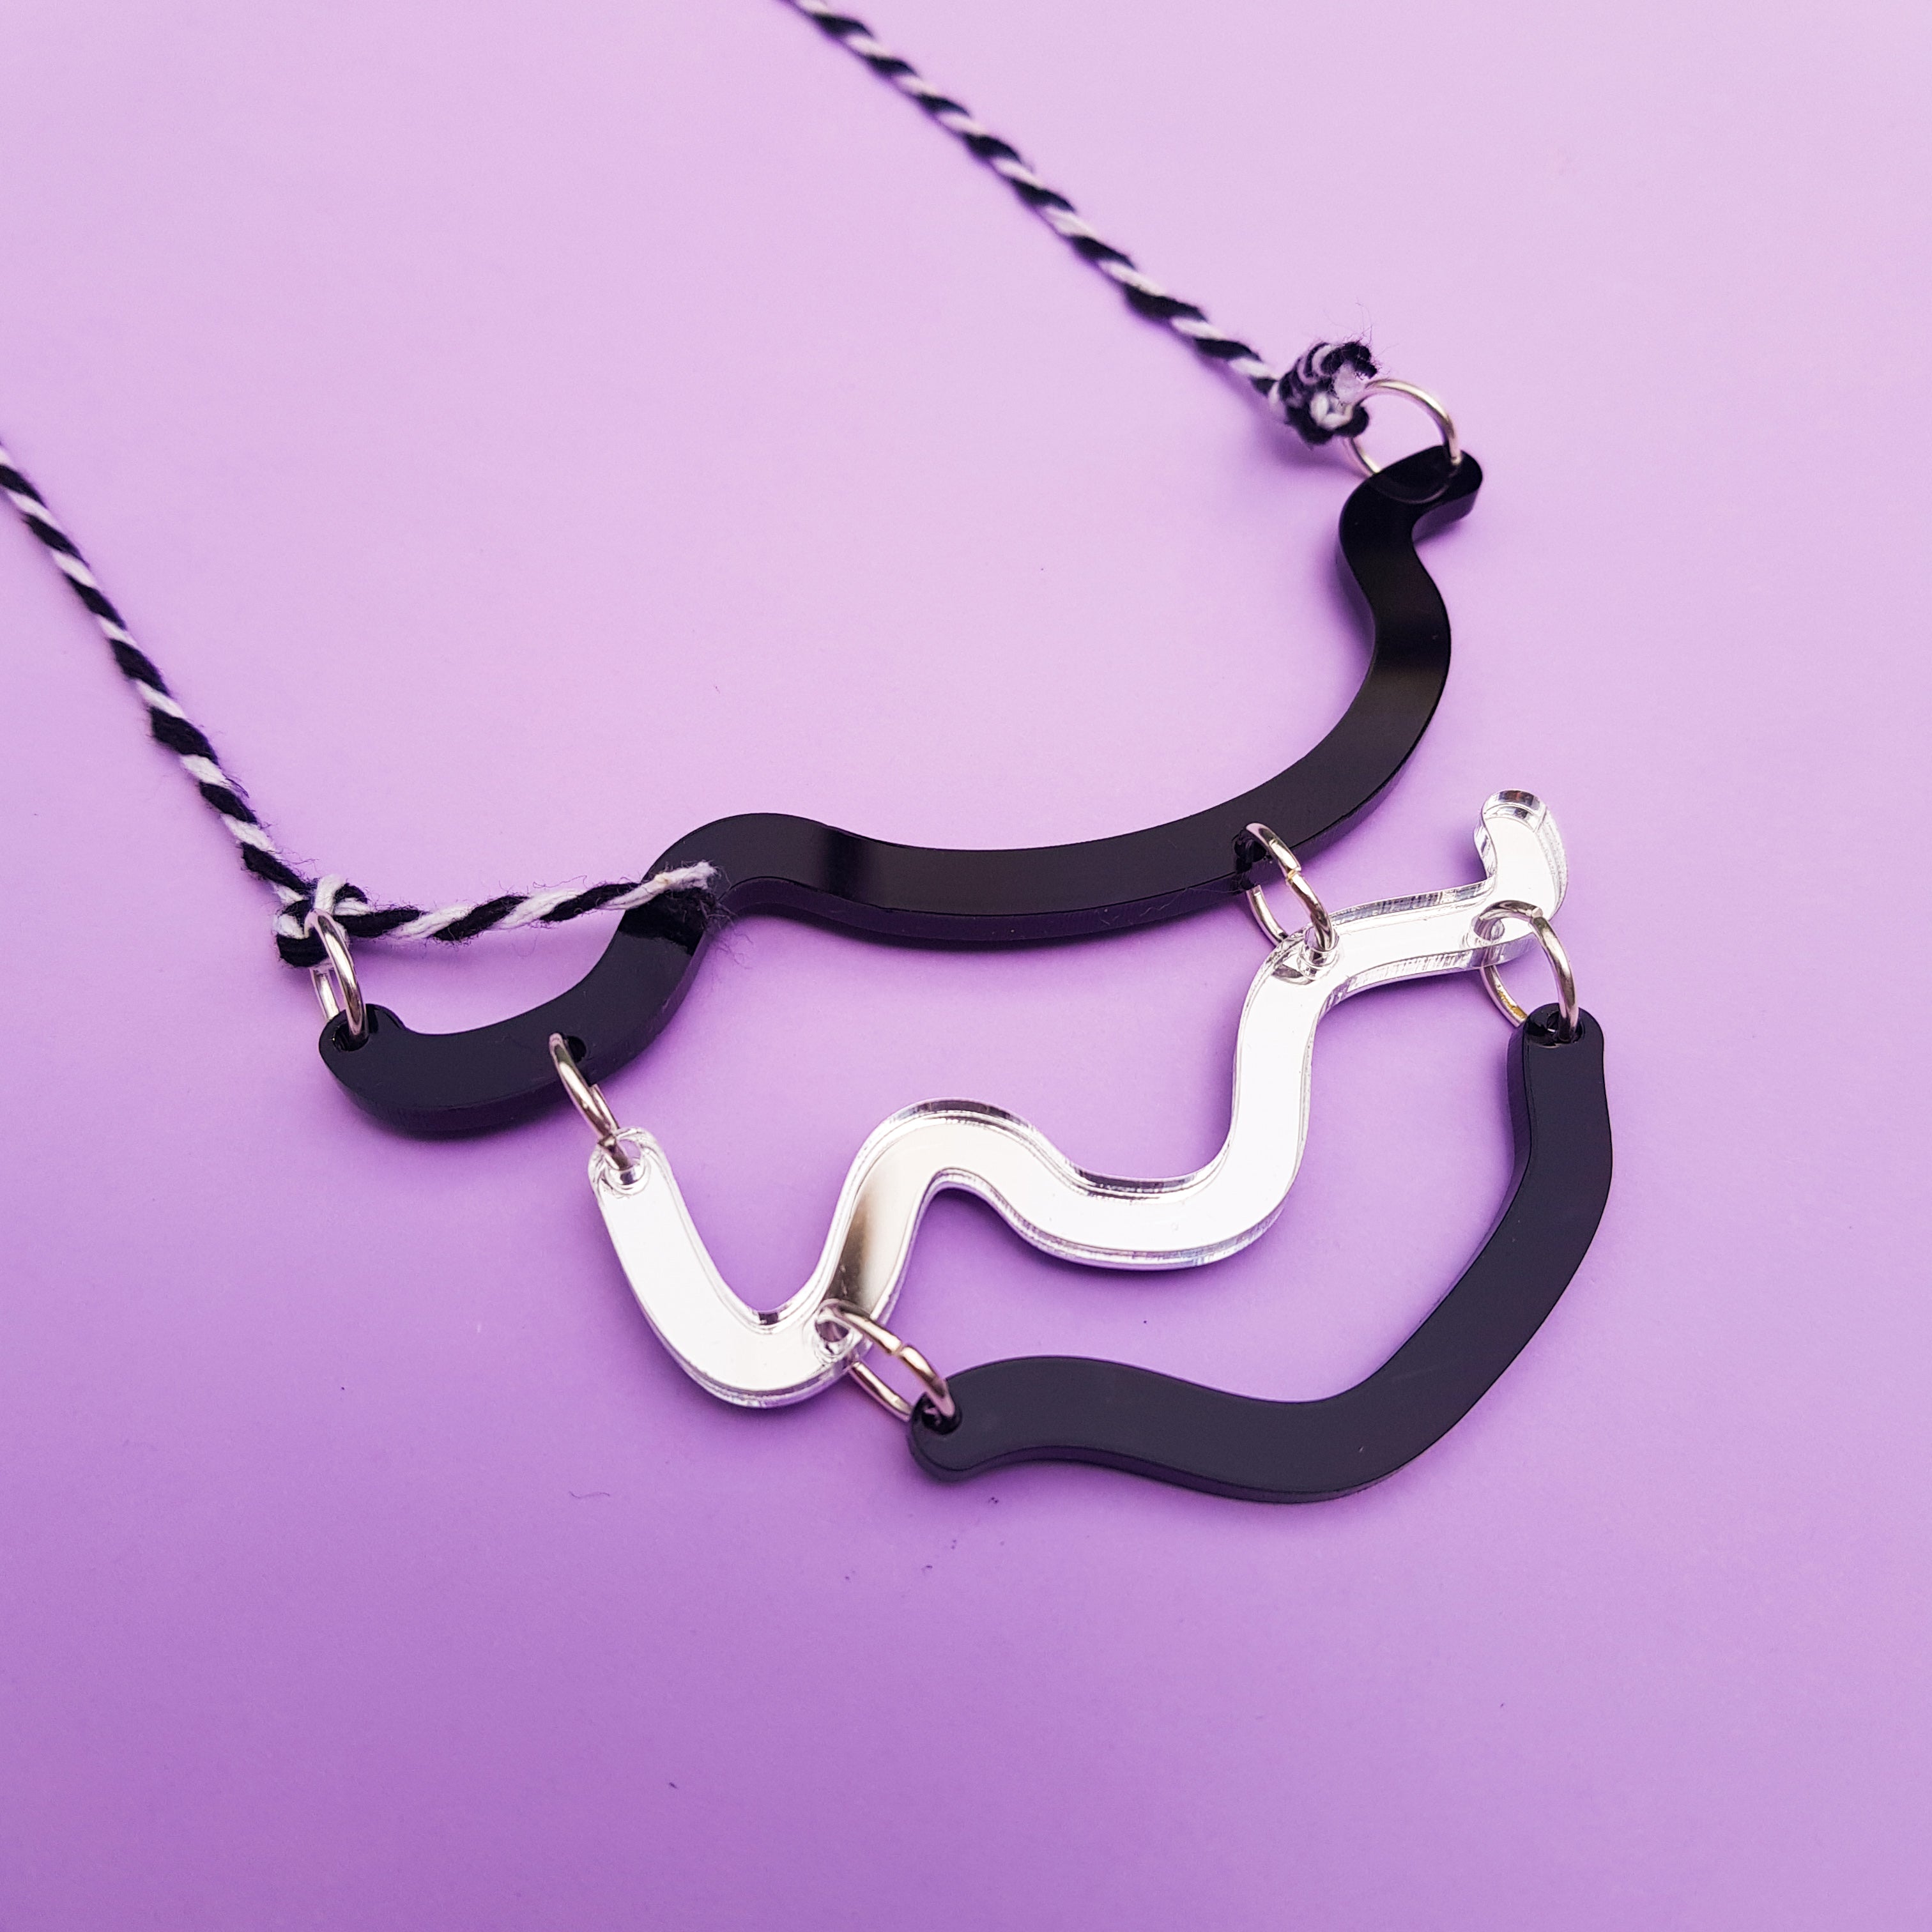 Wiggle necklace